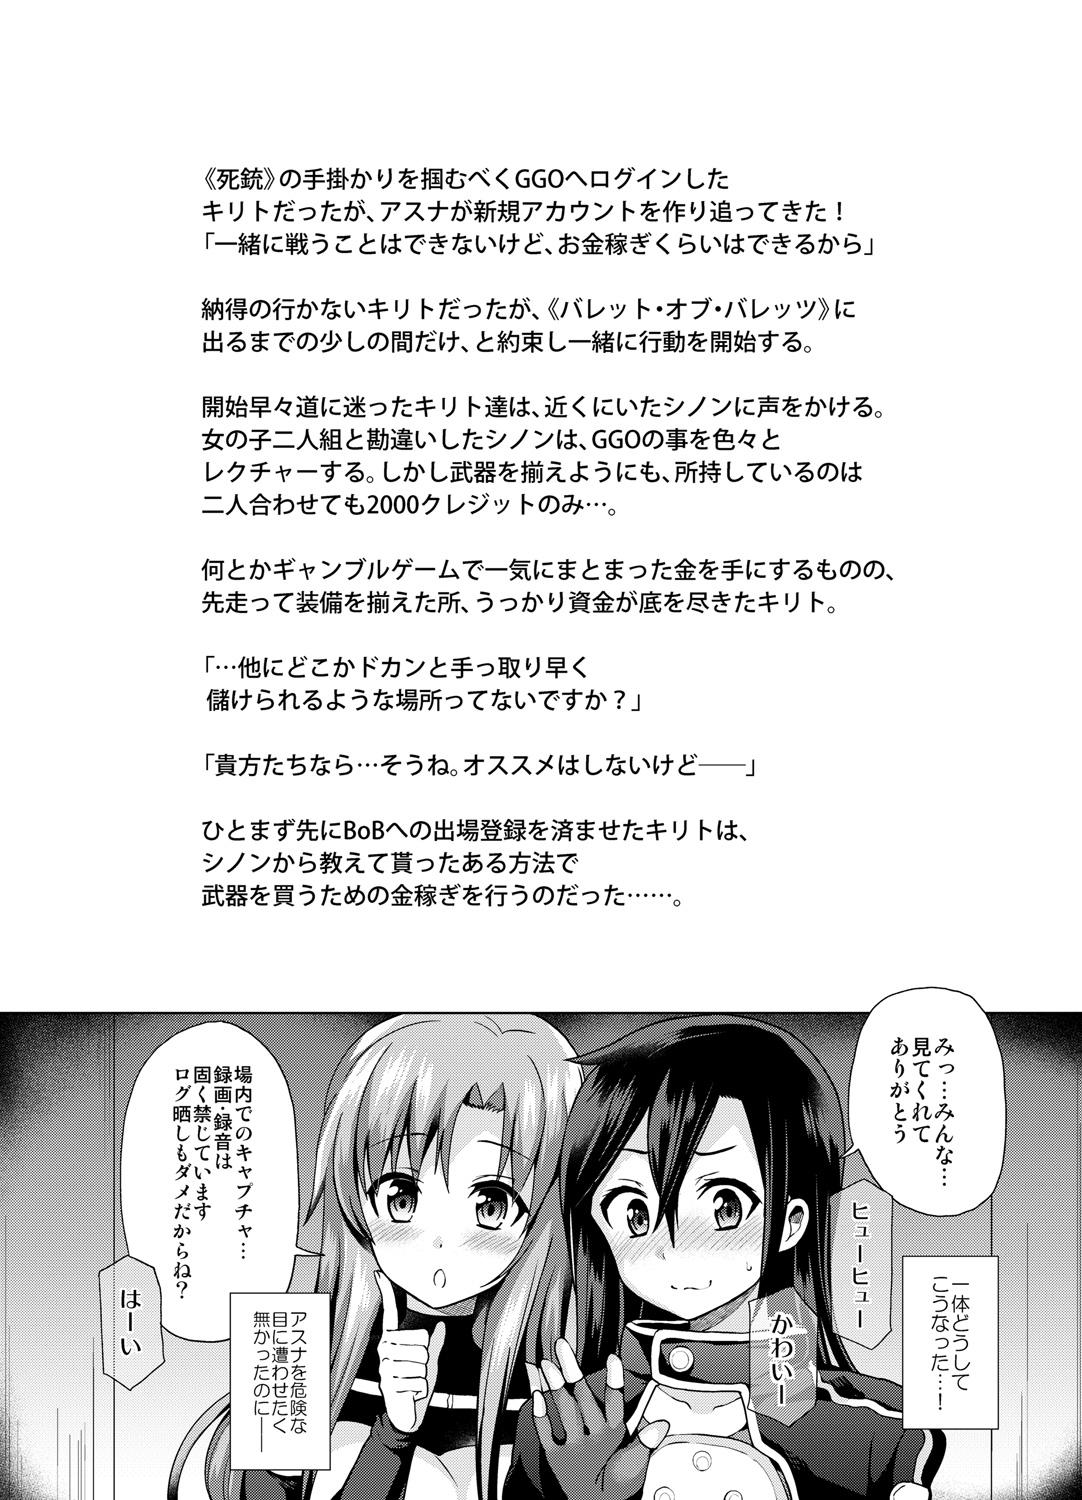 Free Sword of Asuna - Sword art online Chibola - Page 3